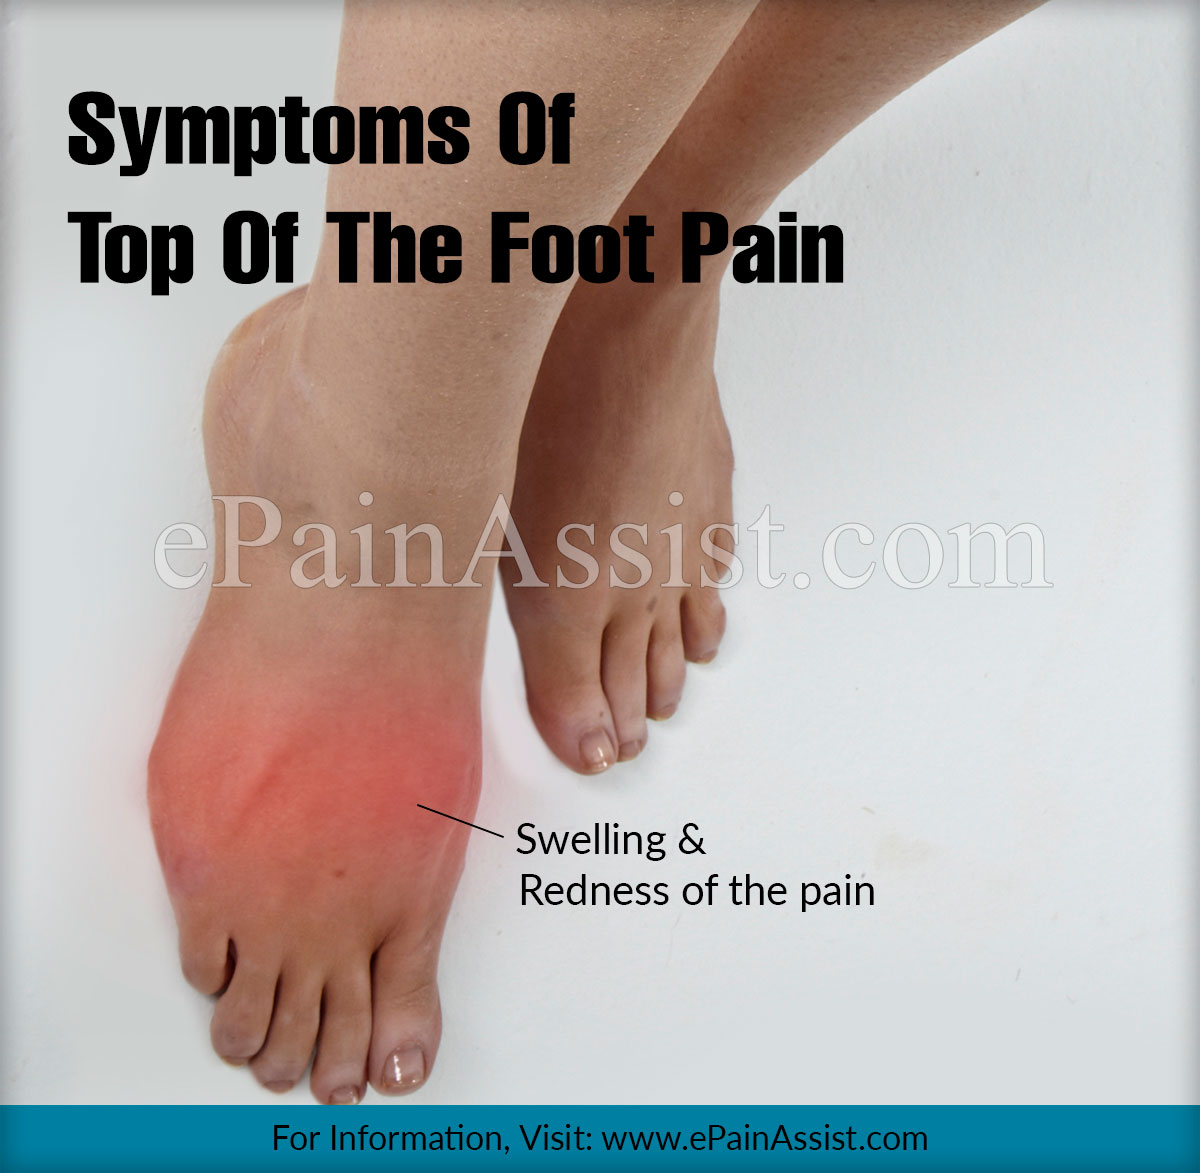 Top of the Foot Pain Treatment, Exercises, Causes, Symptoms